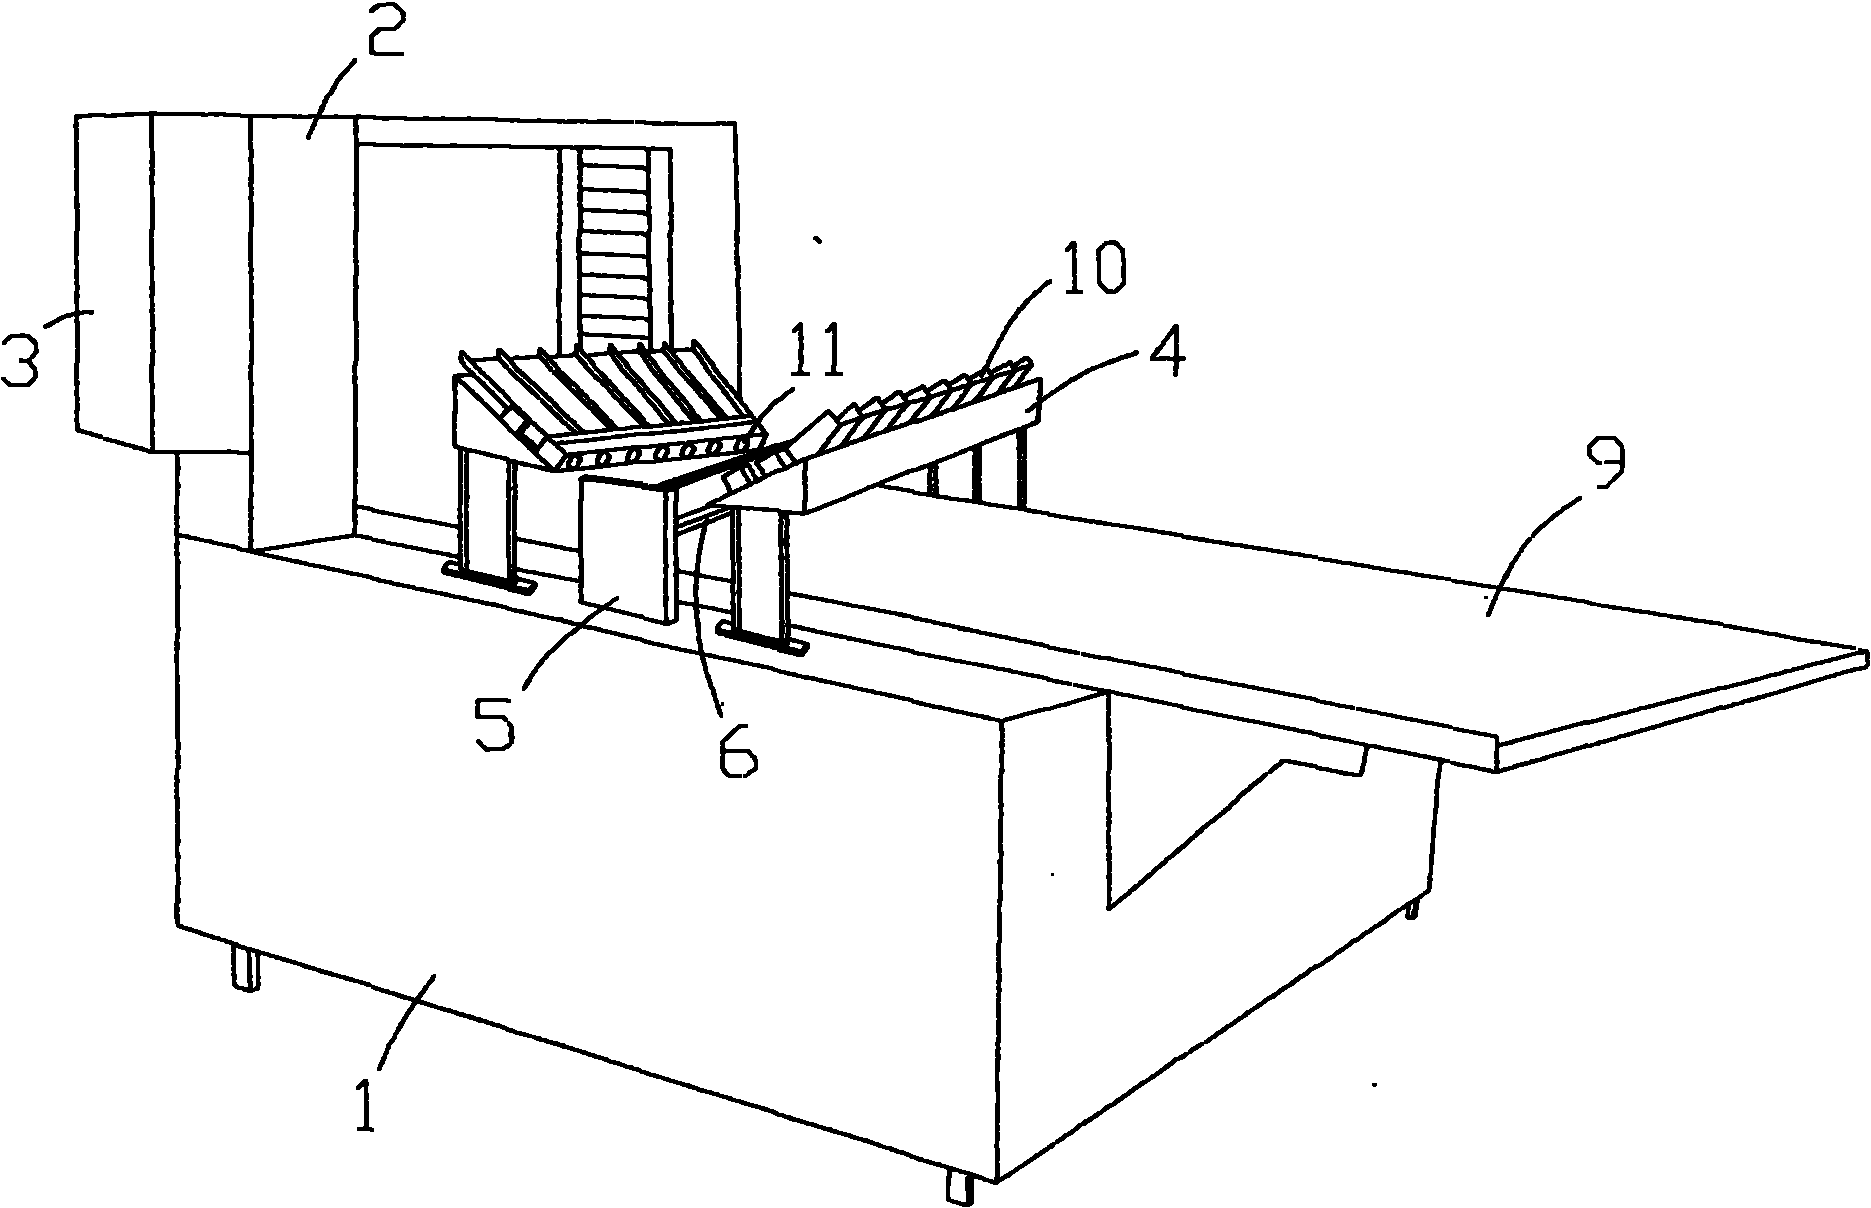 Full-automatic paper holding machine